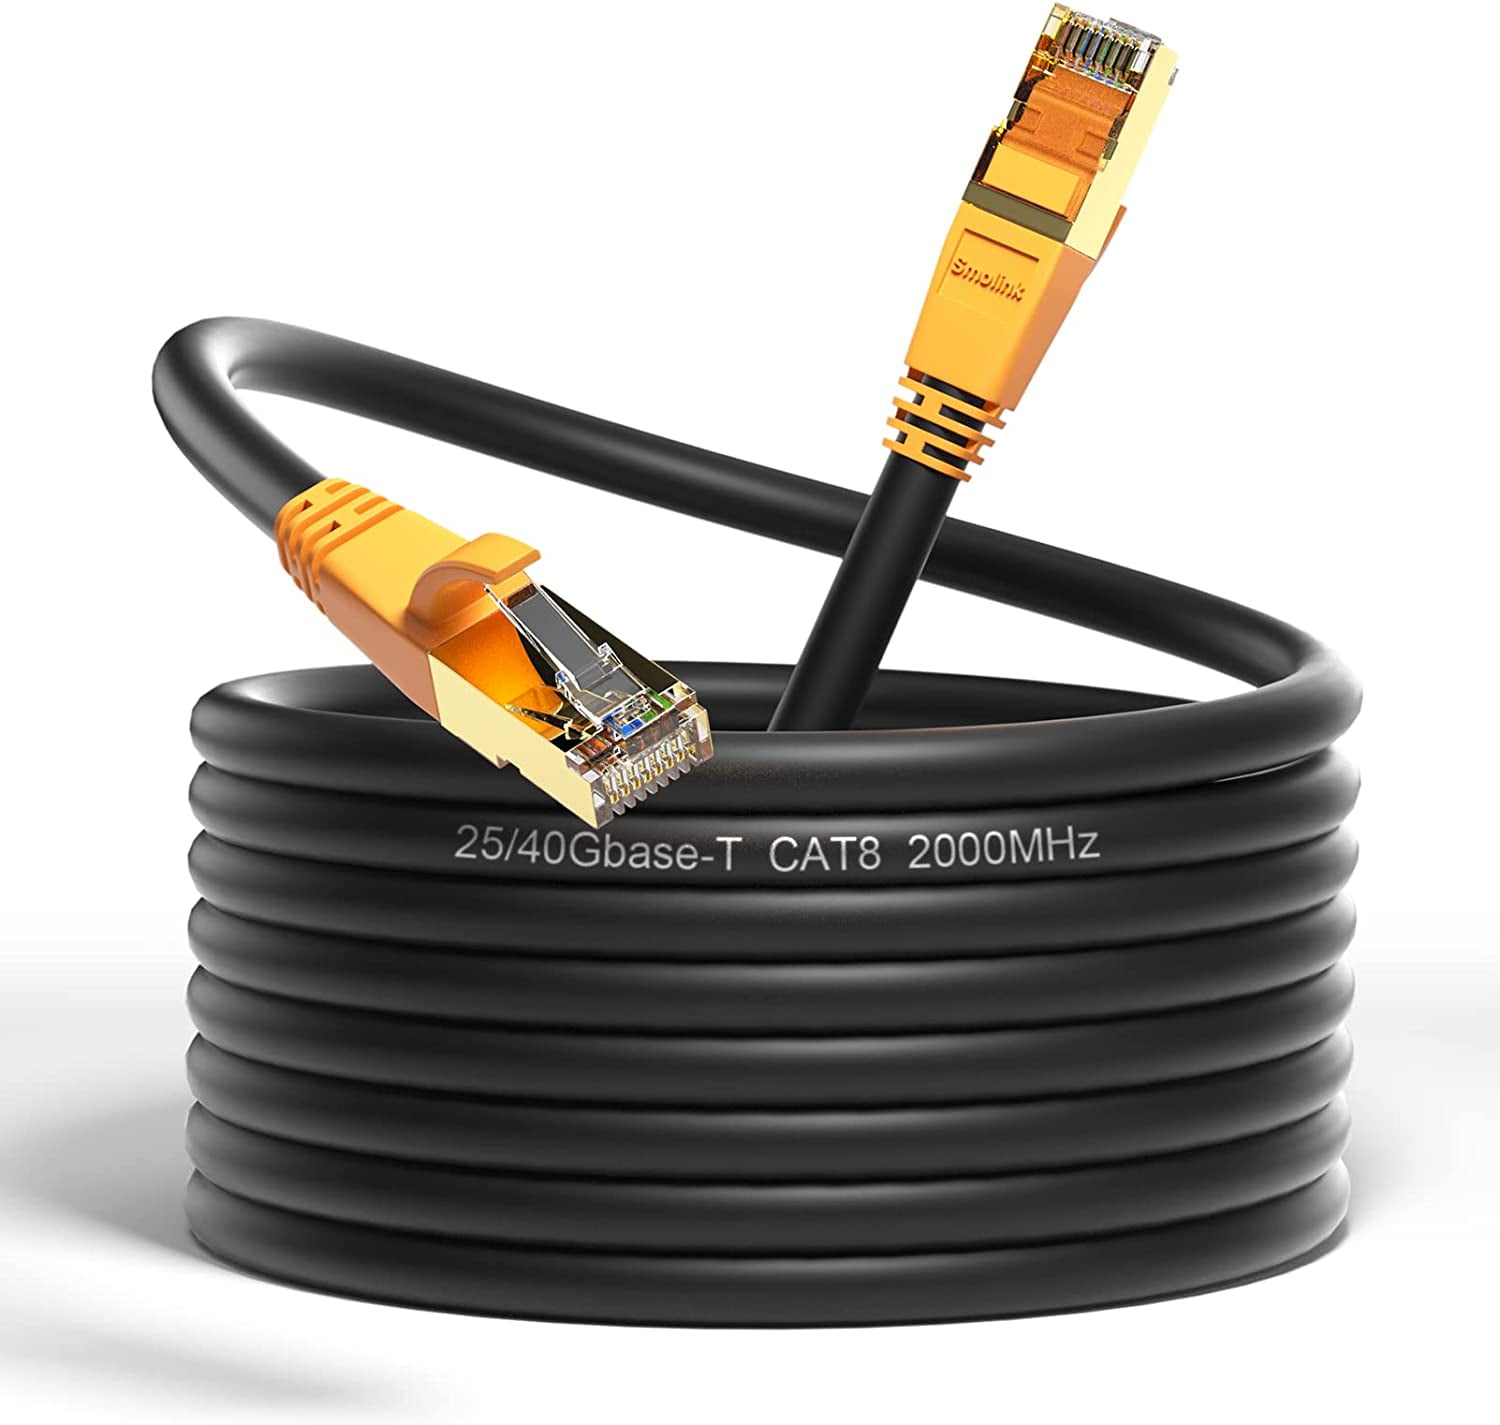 10ft Cat 8 Ethernet Cable - High-Speed 40Gbps LAN Cable for Router, Modem,  Gaming, Xbox, PS4, PS5 